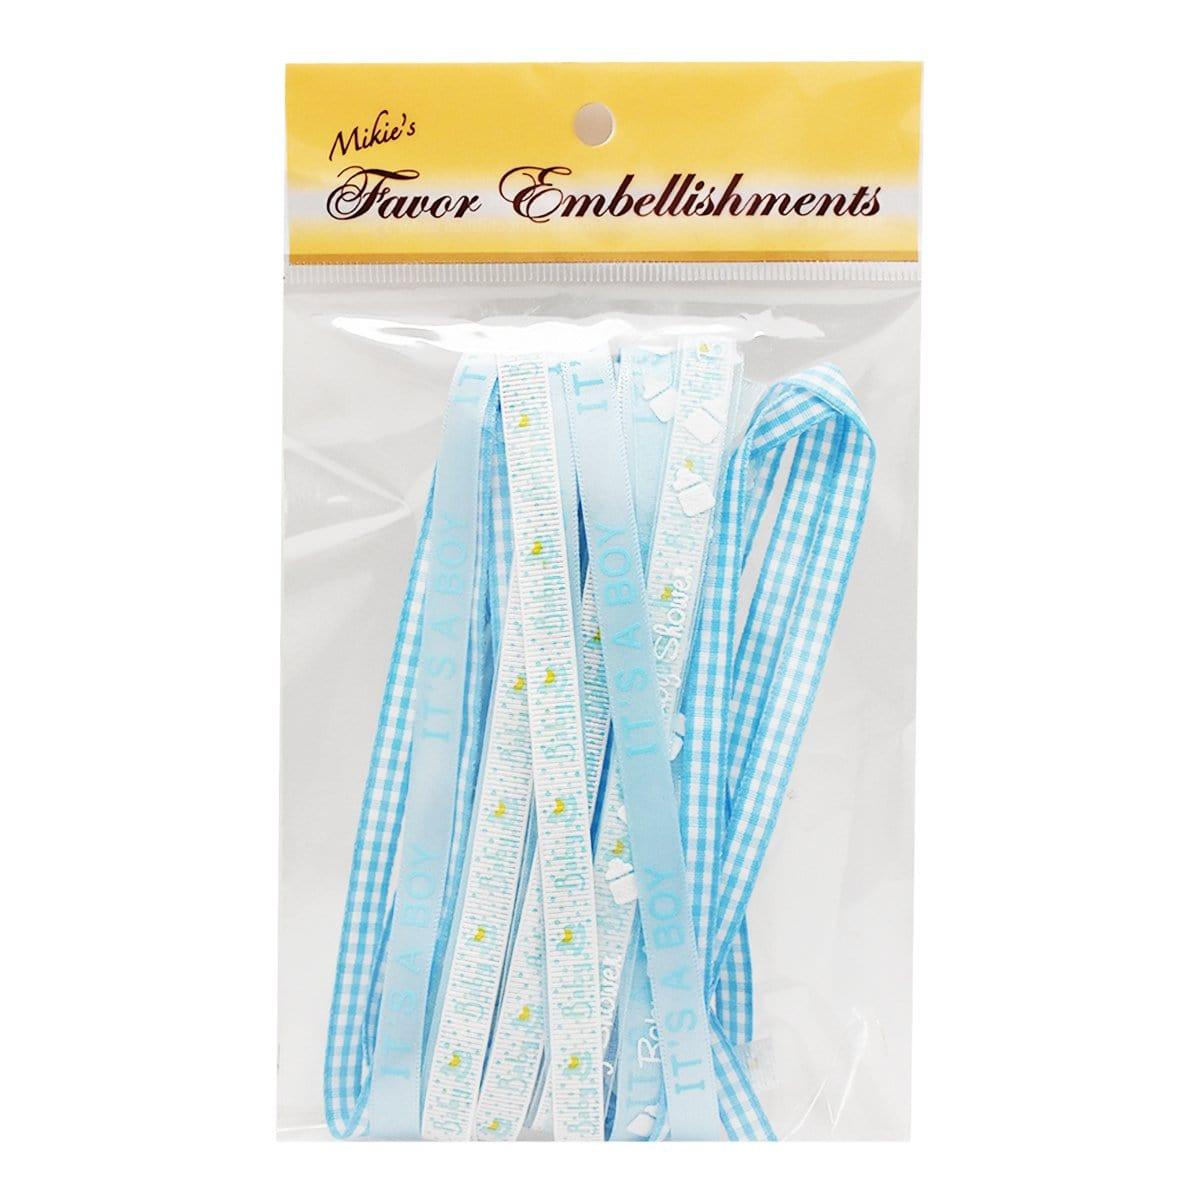 Buy Baby Shower Blue ribbon kit sold at Party Expert